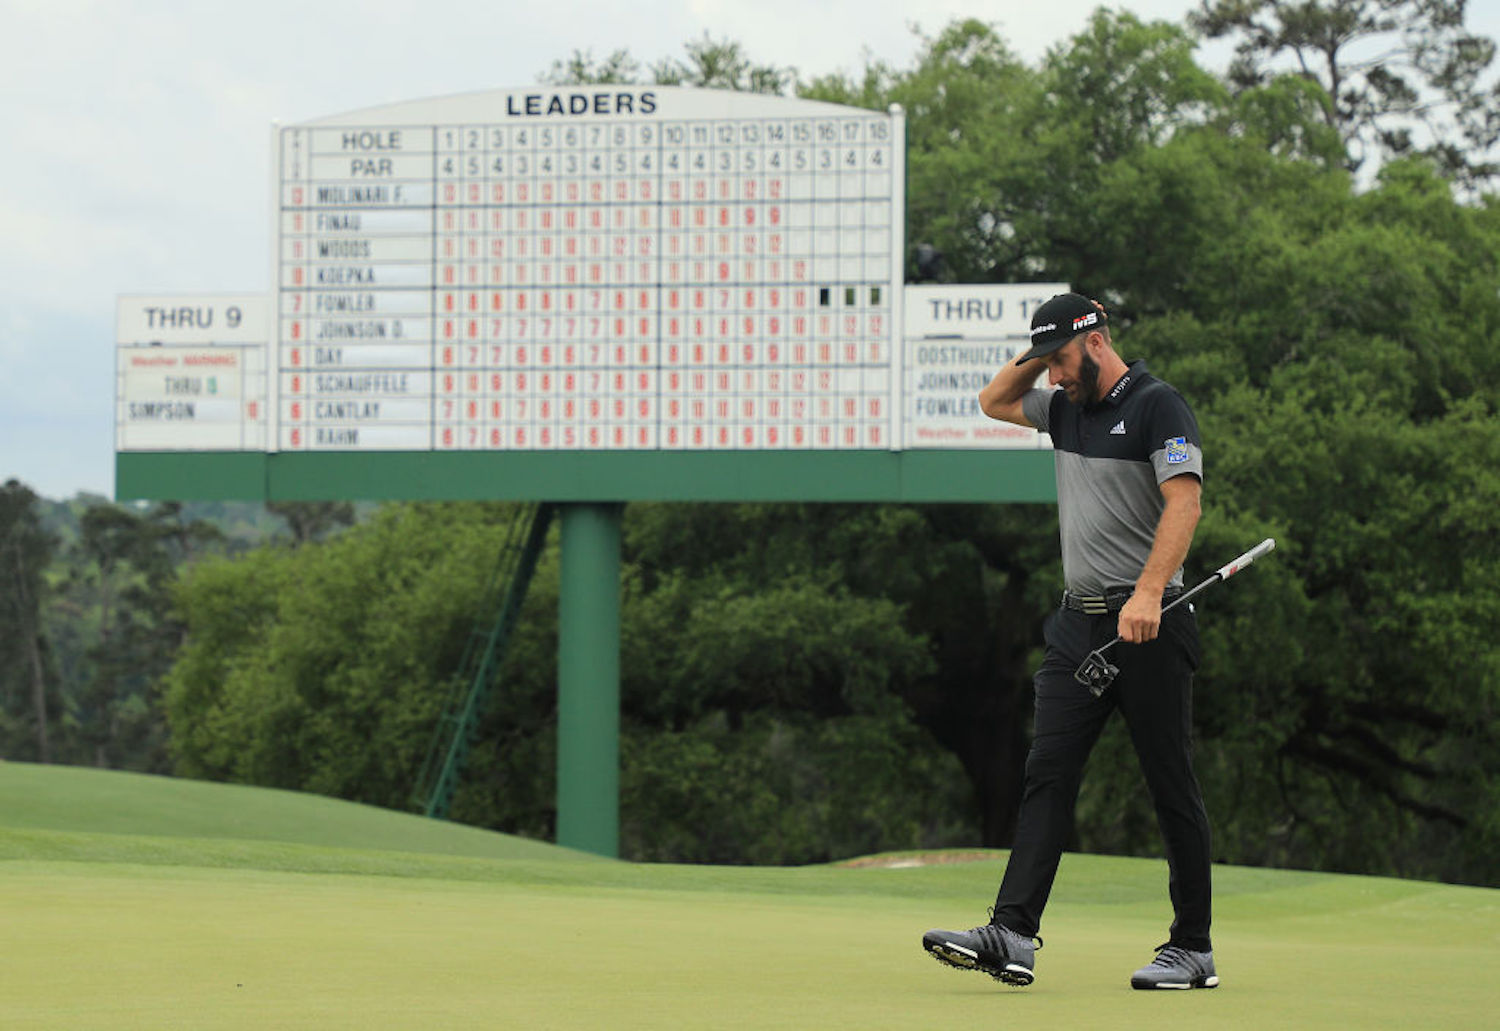 Dustin Johnson hasn't played since the U.S. Open because of a positive COVID-19 test, but he's back on the course just in time for The Masters.